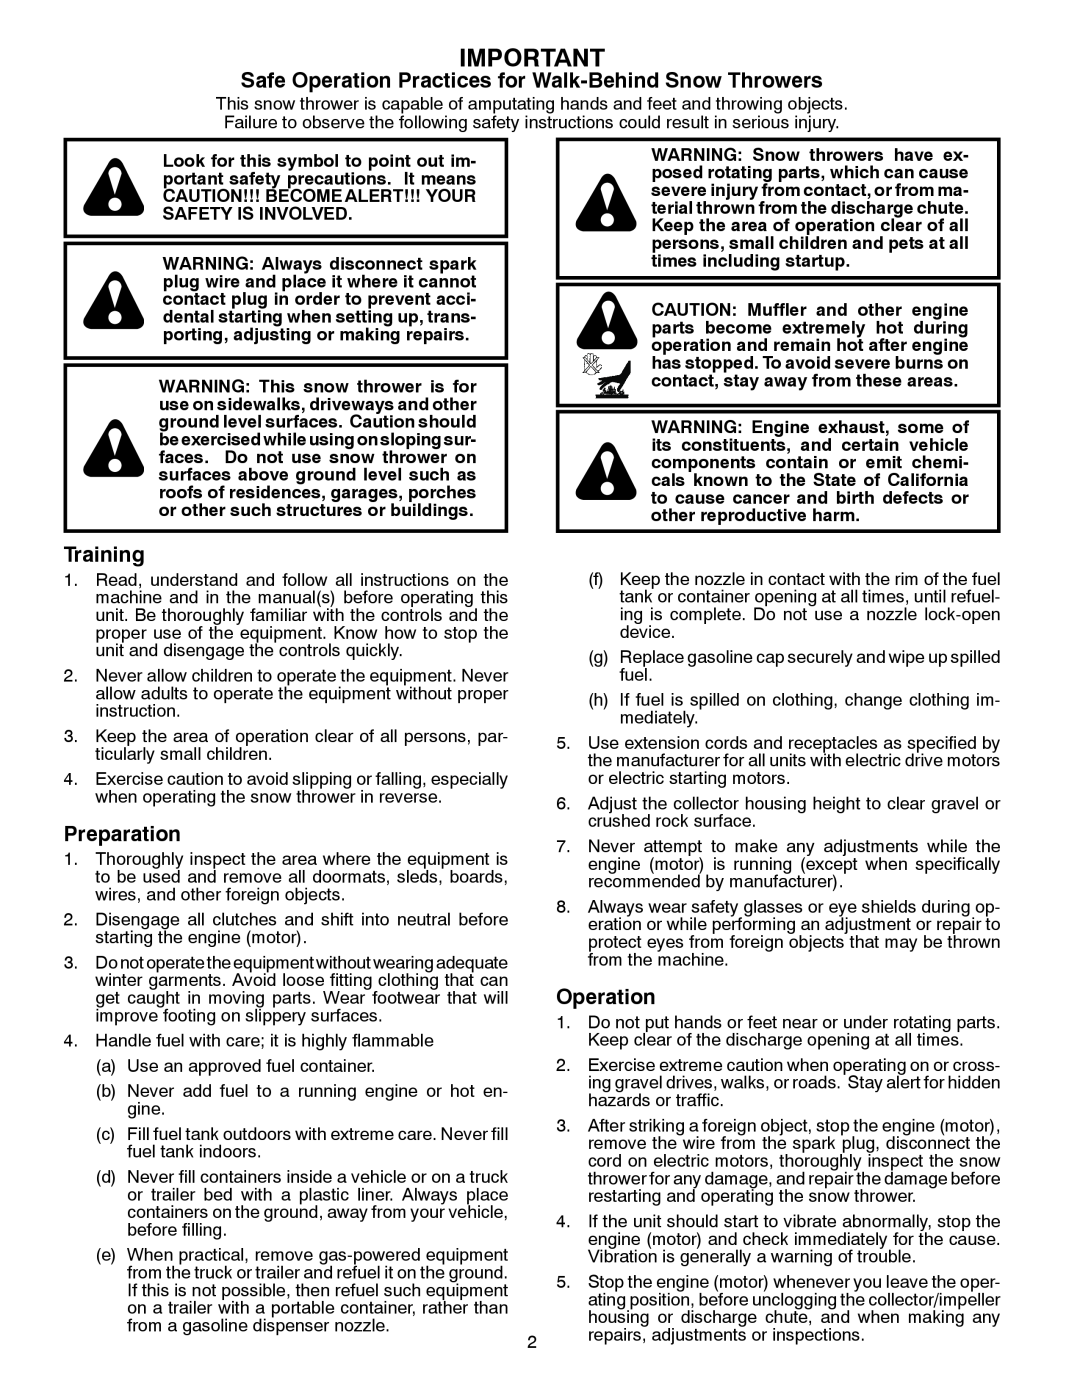 Poulan 428701, 96198002601 owner manual Safe Operation Practices for Walk-Behind Snow Throwers, Training, Preparation 